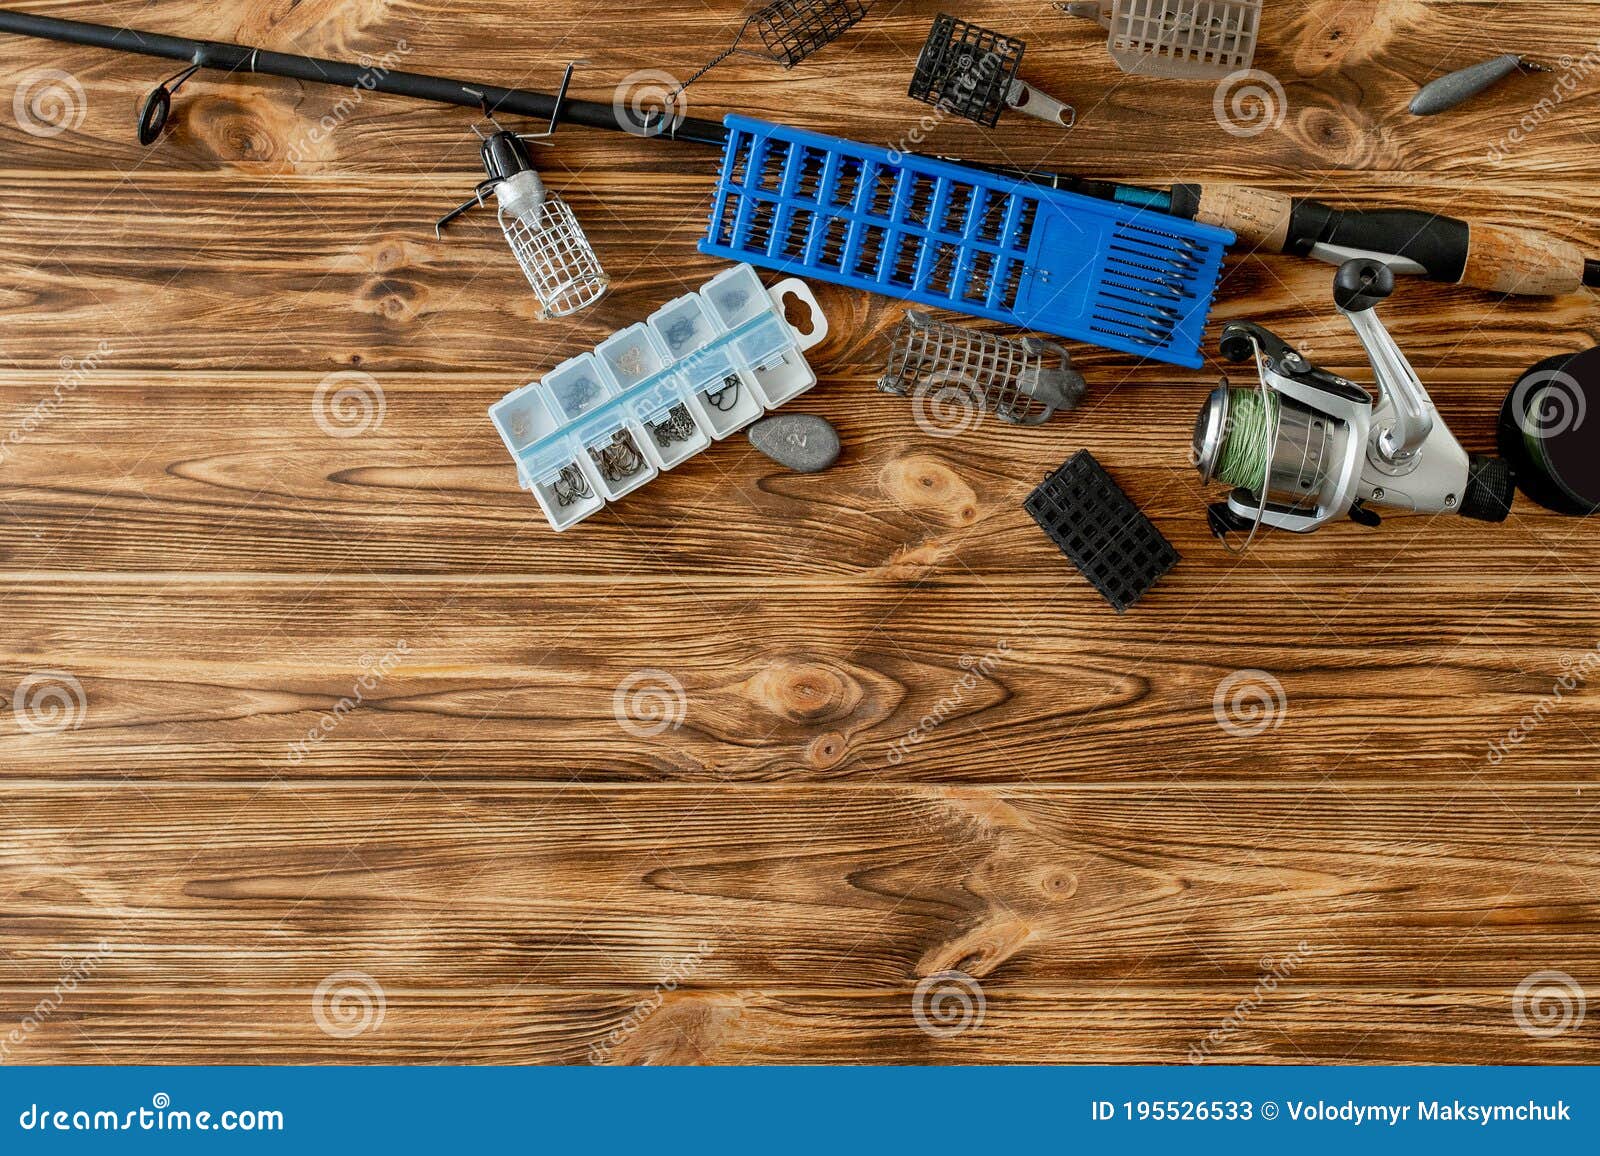 Flat Lay with Fishing Tackle, Fishing Rod and Plastic Box with Fishing  Tackle and Hooks, Feeders on Wooden Planks, Copy Space Stock Image - Image  of accessories, fishhook: 195526533